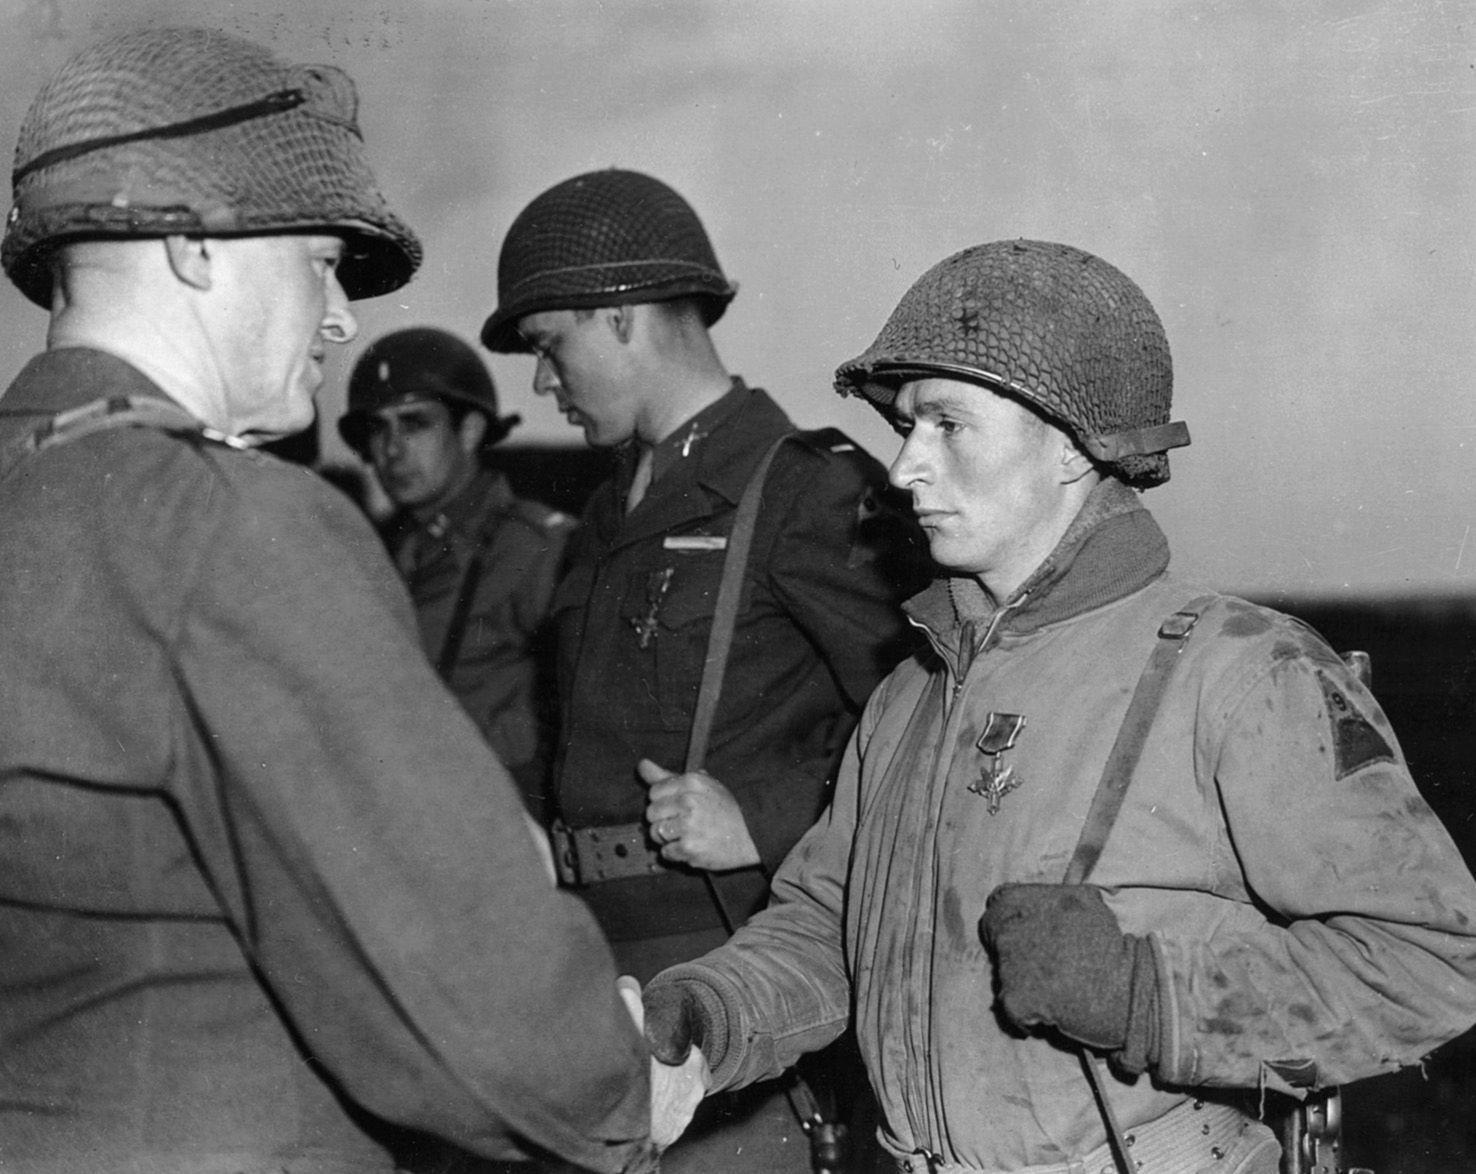 For heroism in action at St. Vith, Technical Sergeant Michael Chincher of the 9th Armored Division receives the Distinguished Service Cross from Maj. Gen. John W. Leonard, the division commander, on April 11, 1945.